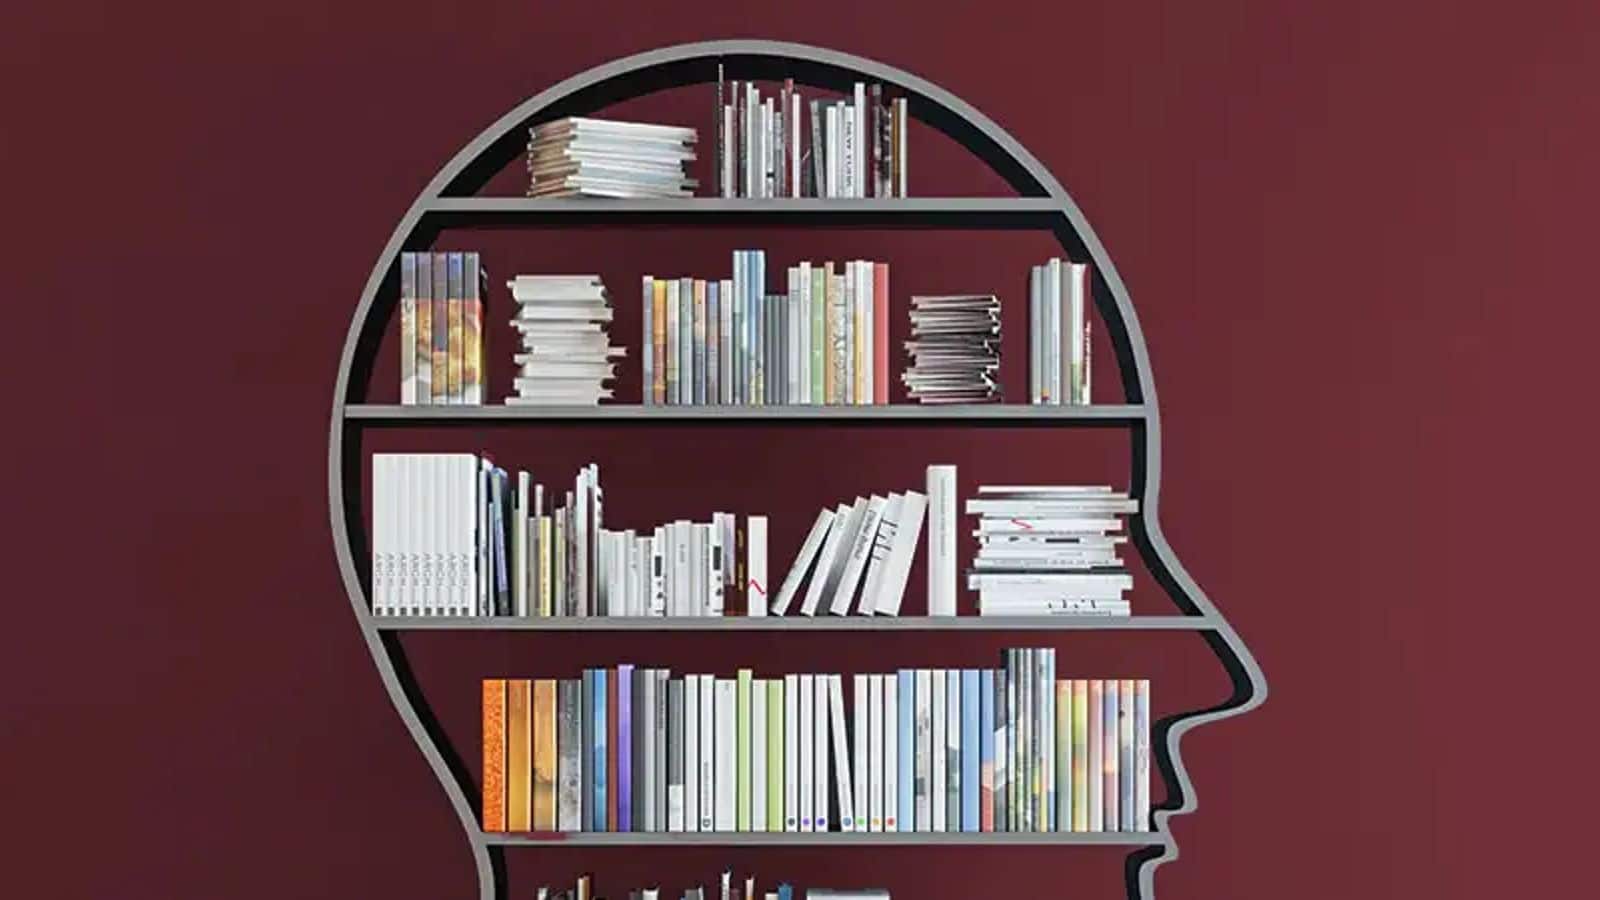 Cerebral selections: Scientists' favorite science books to read